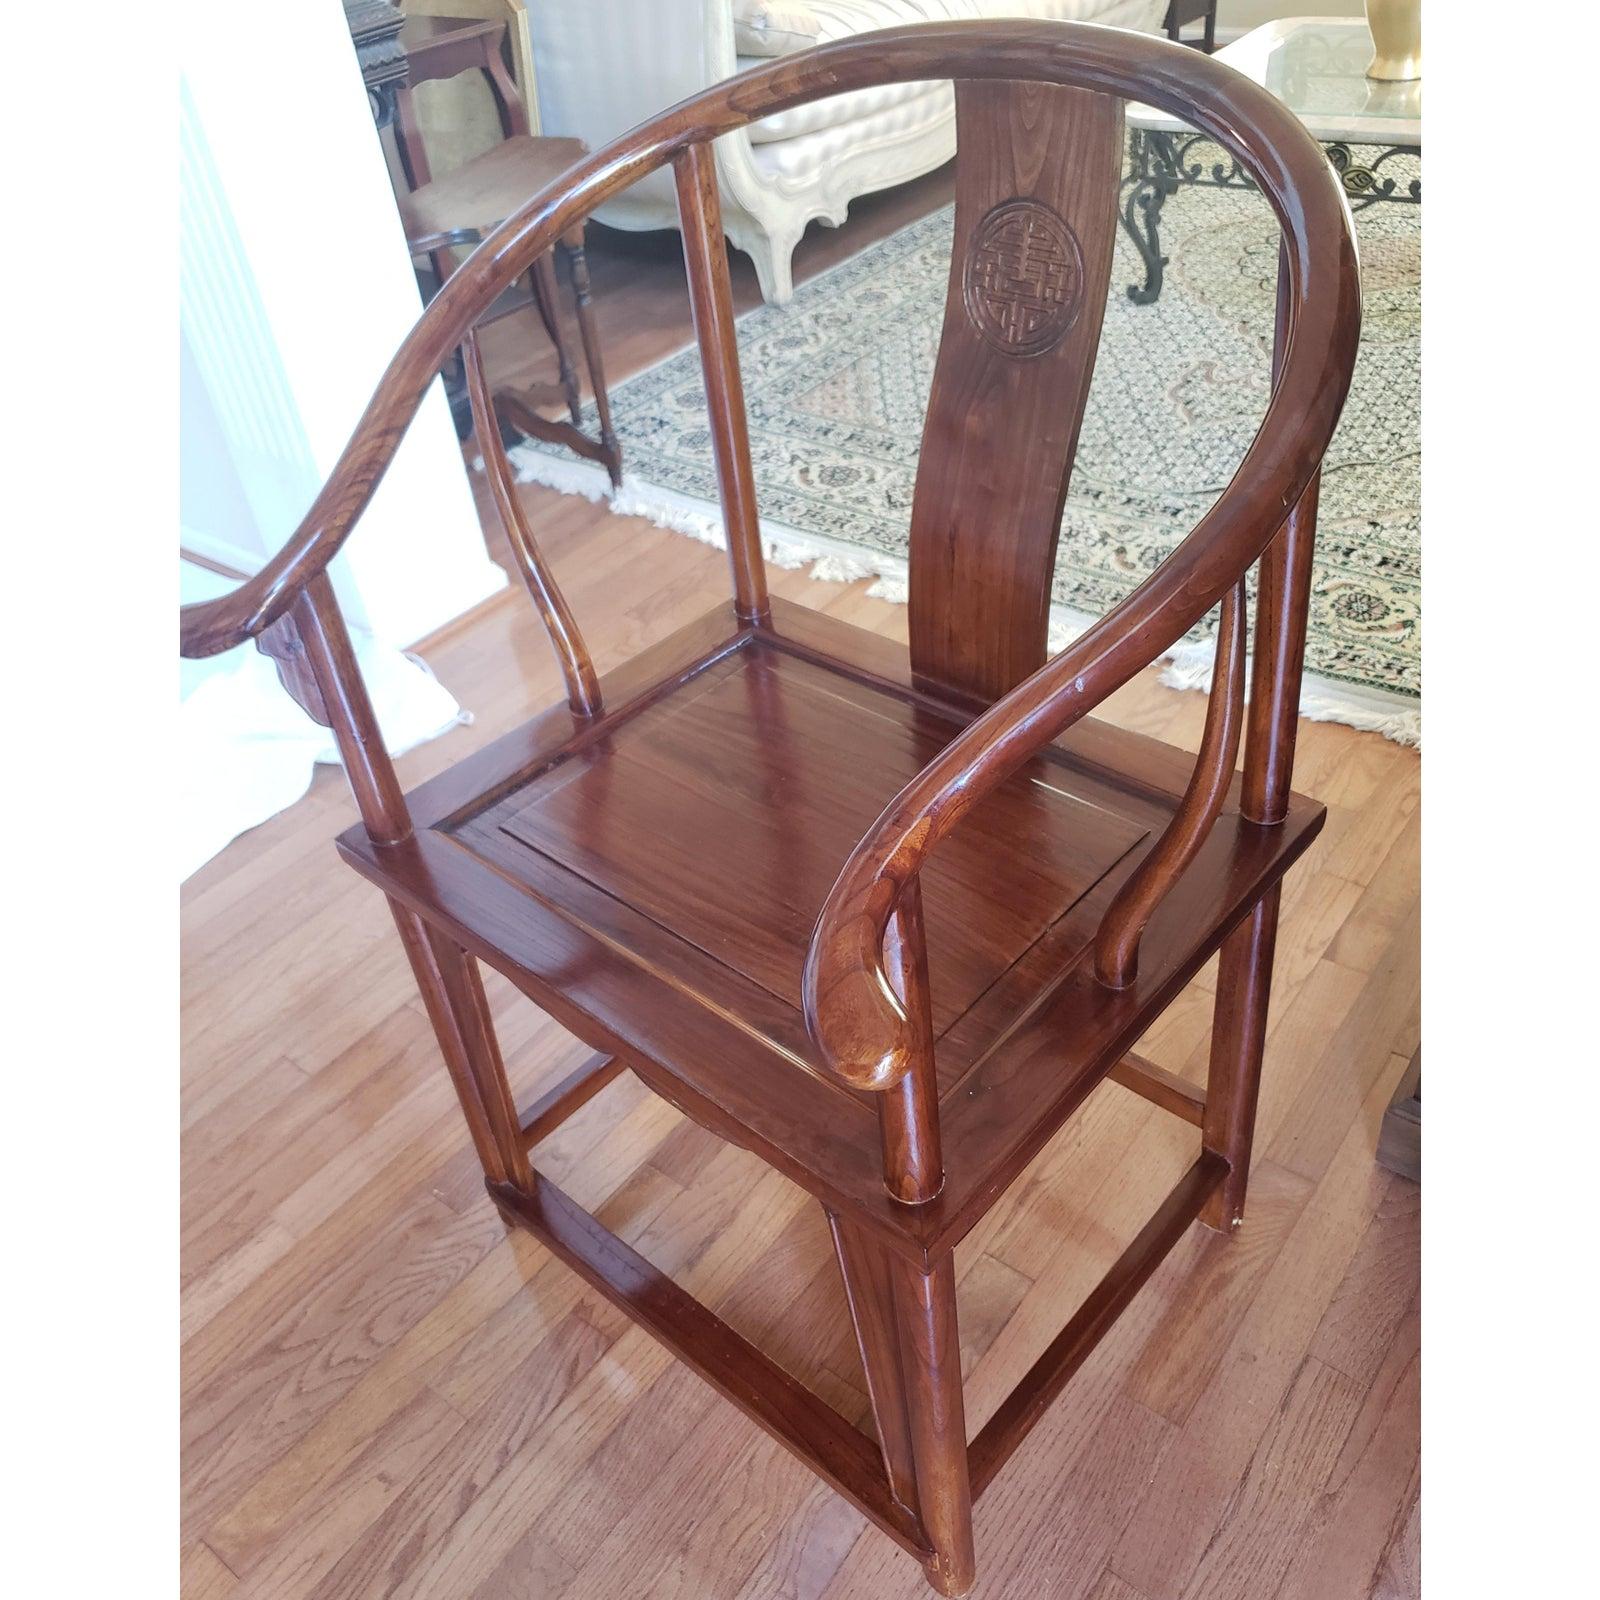 1970s Ming Style Rosewood Horseshoe Chairs In Good Condition For Sale In Germantown, MD